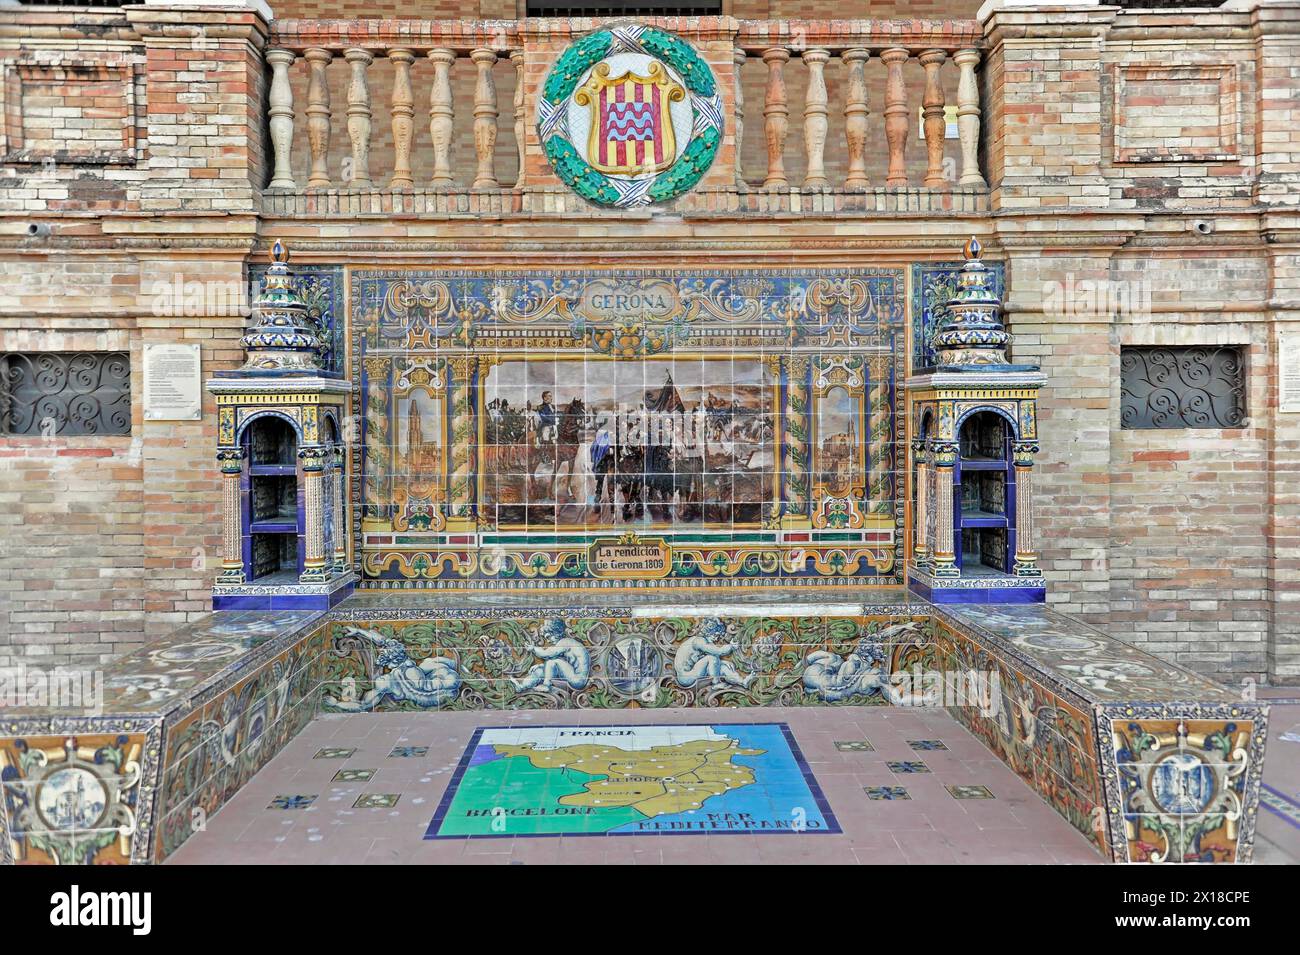 Plaza de Espana in Seville, Seville, Decorated tile with the coat of arms of the province of A Coruna, Seville, Andalusia, Spain Stock Photo